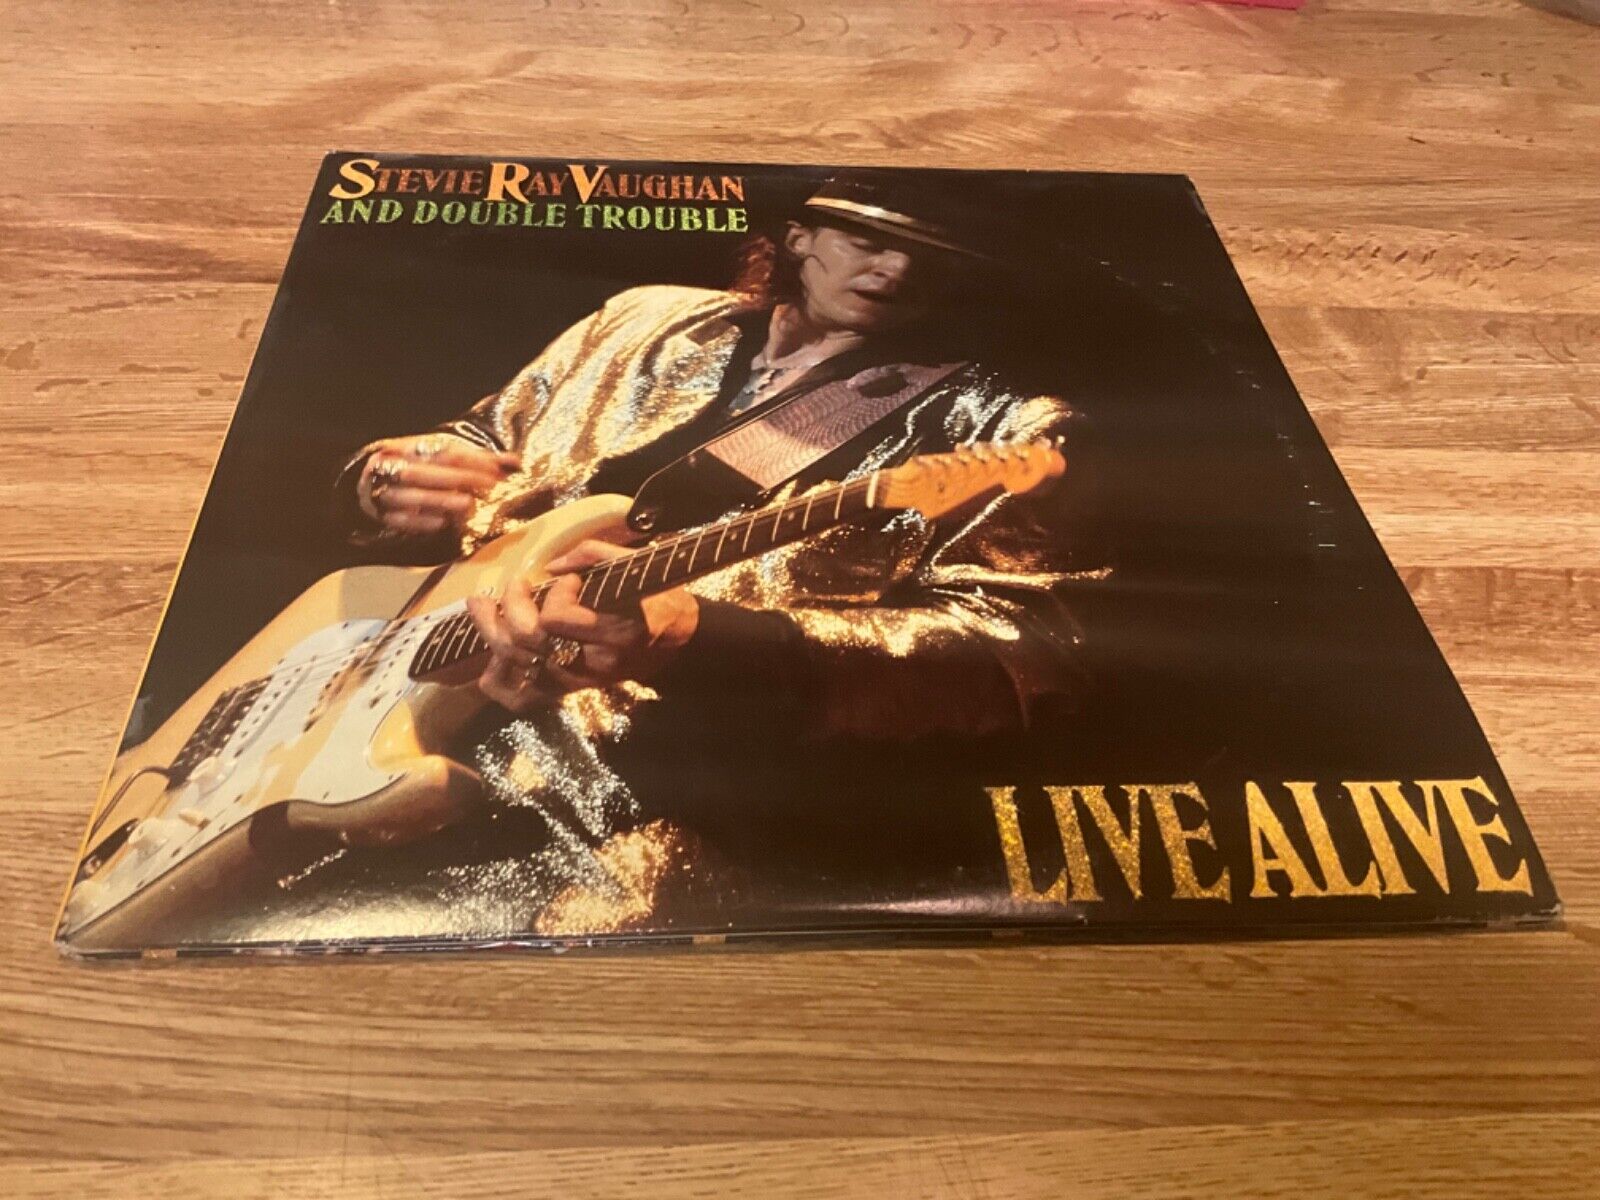 Stevie Ray Vaughan And Double Trouble* ‎– Live Alive LP